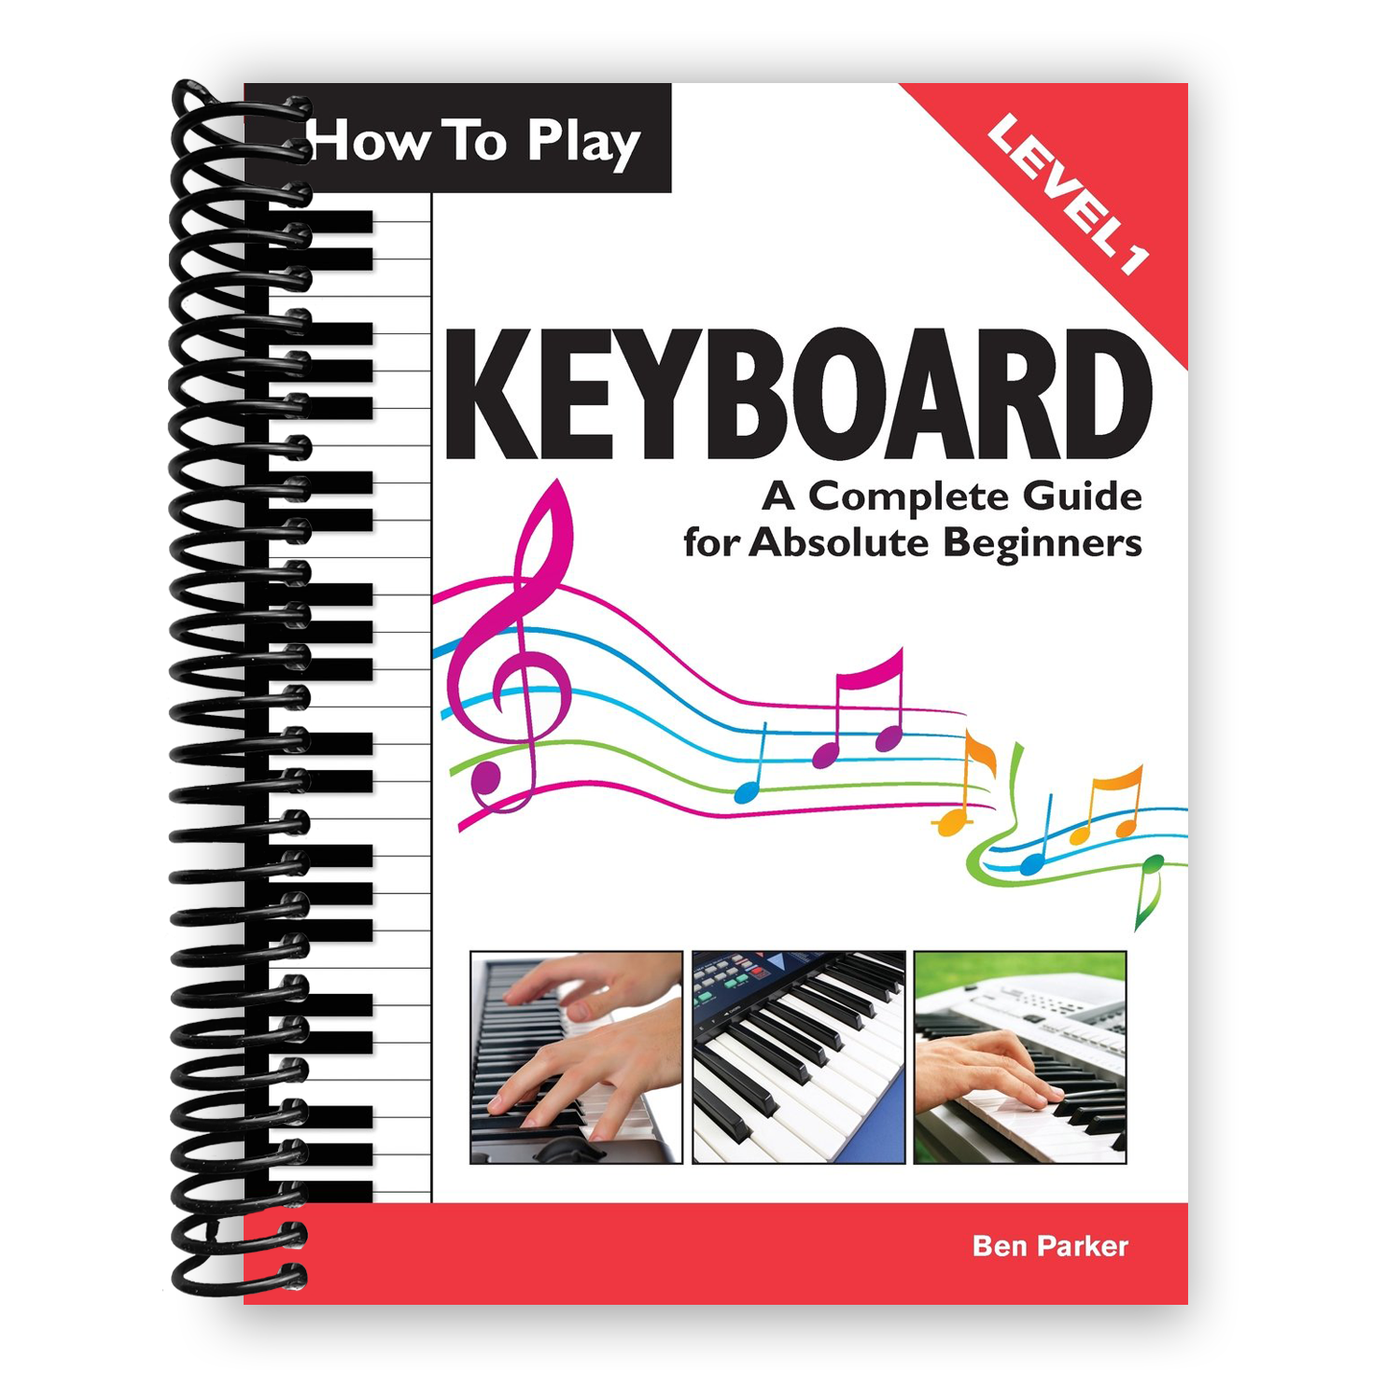 How To Play Keyboard: A Complete Guide for Absolute Beginners (Spiral Bound)